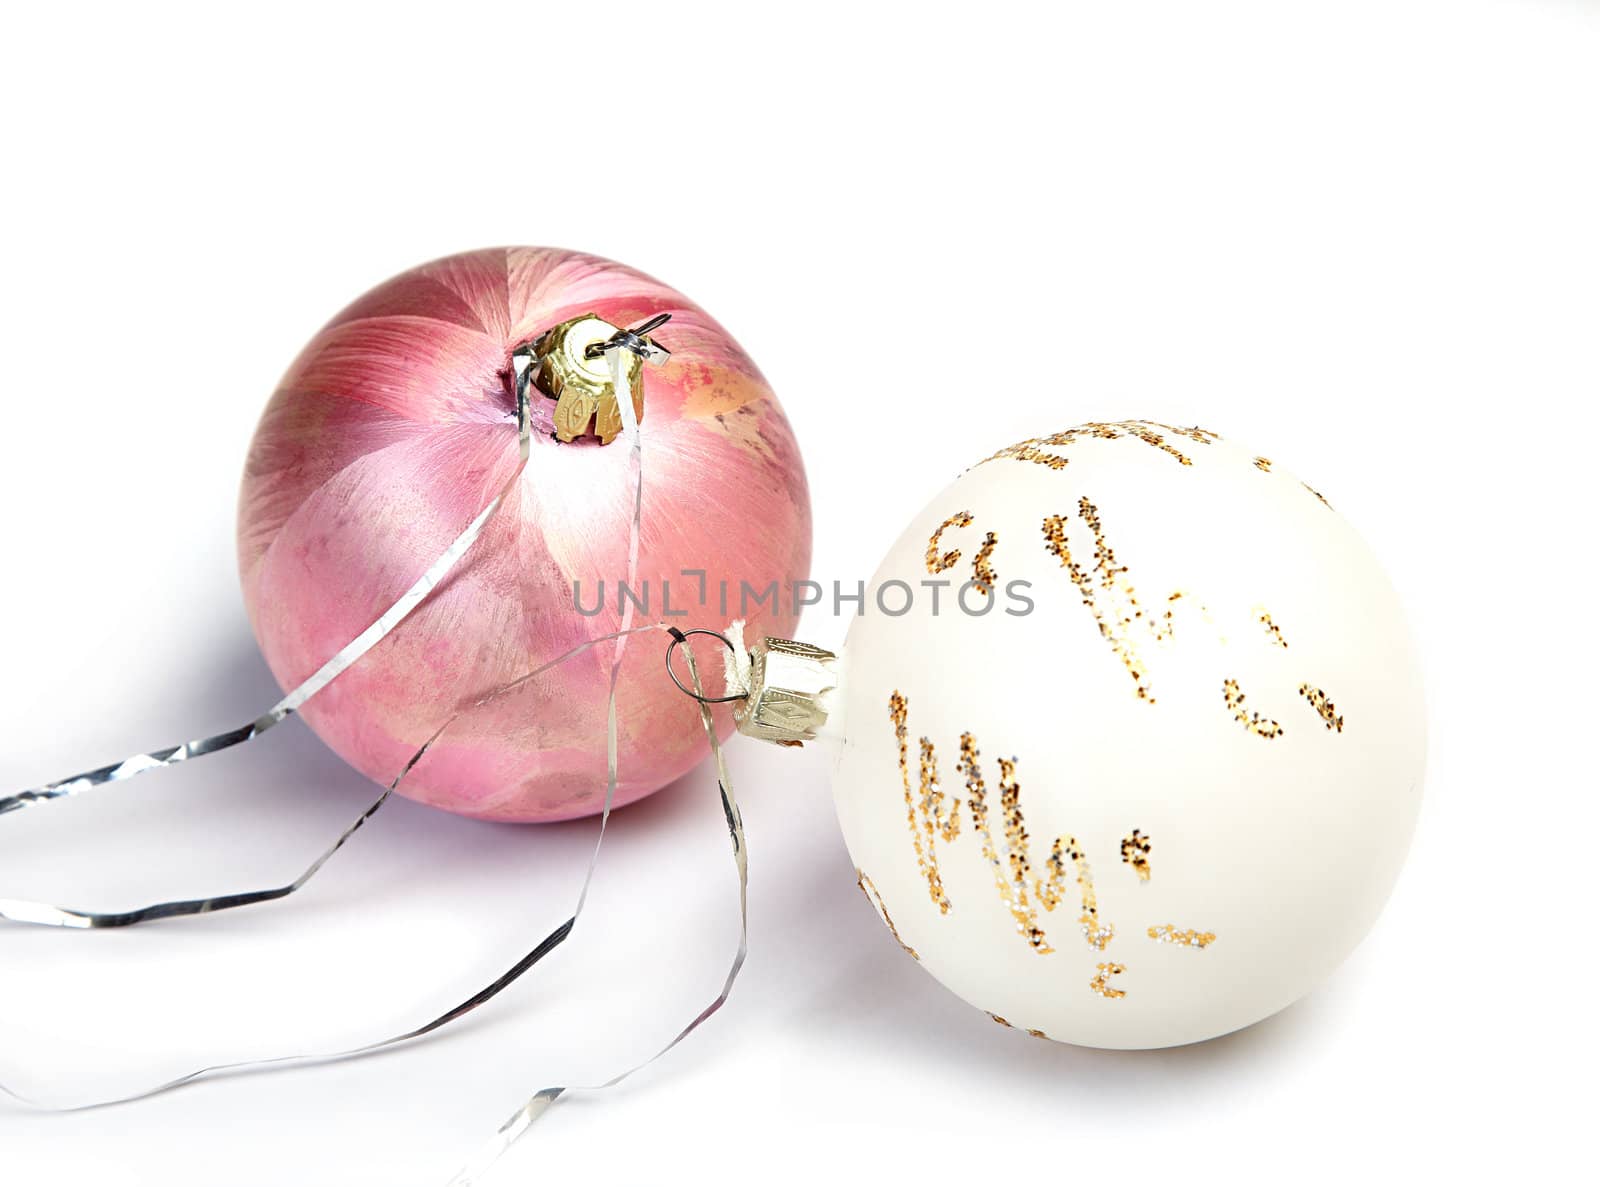 Red and white fur-tree spheres on a white background